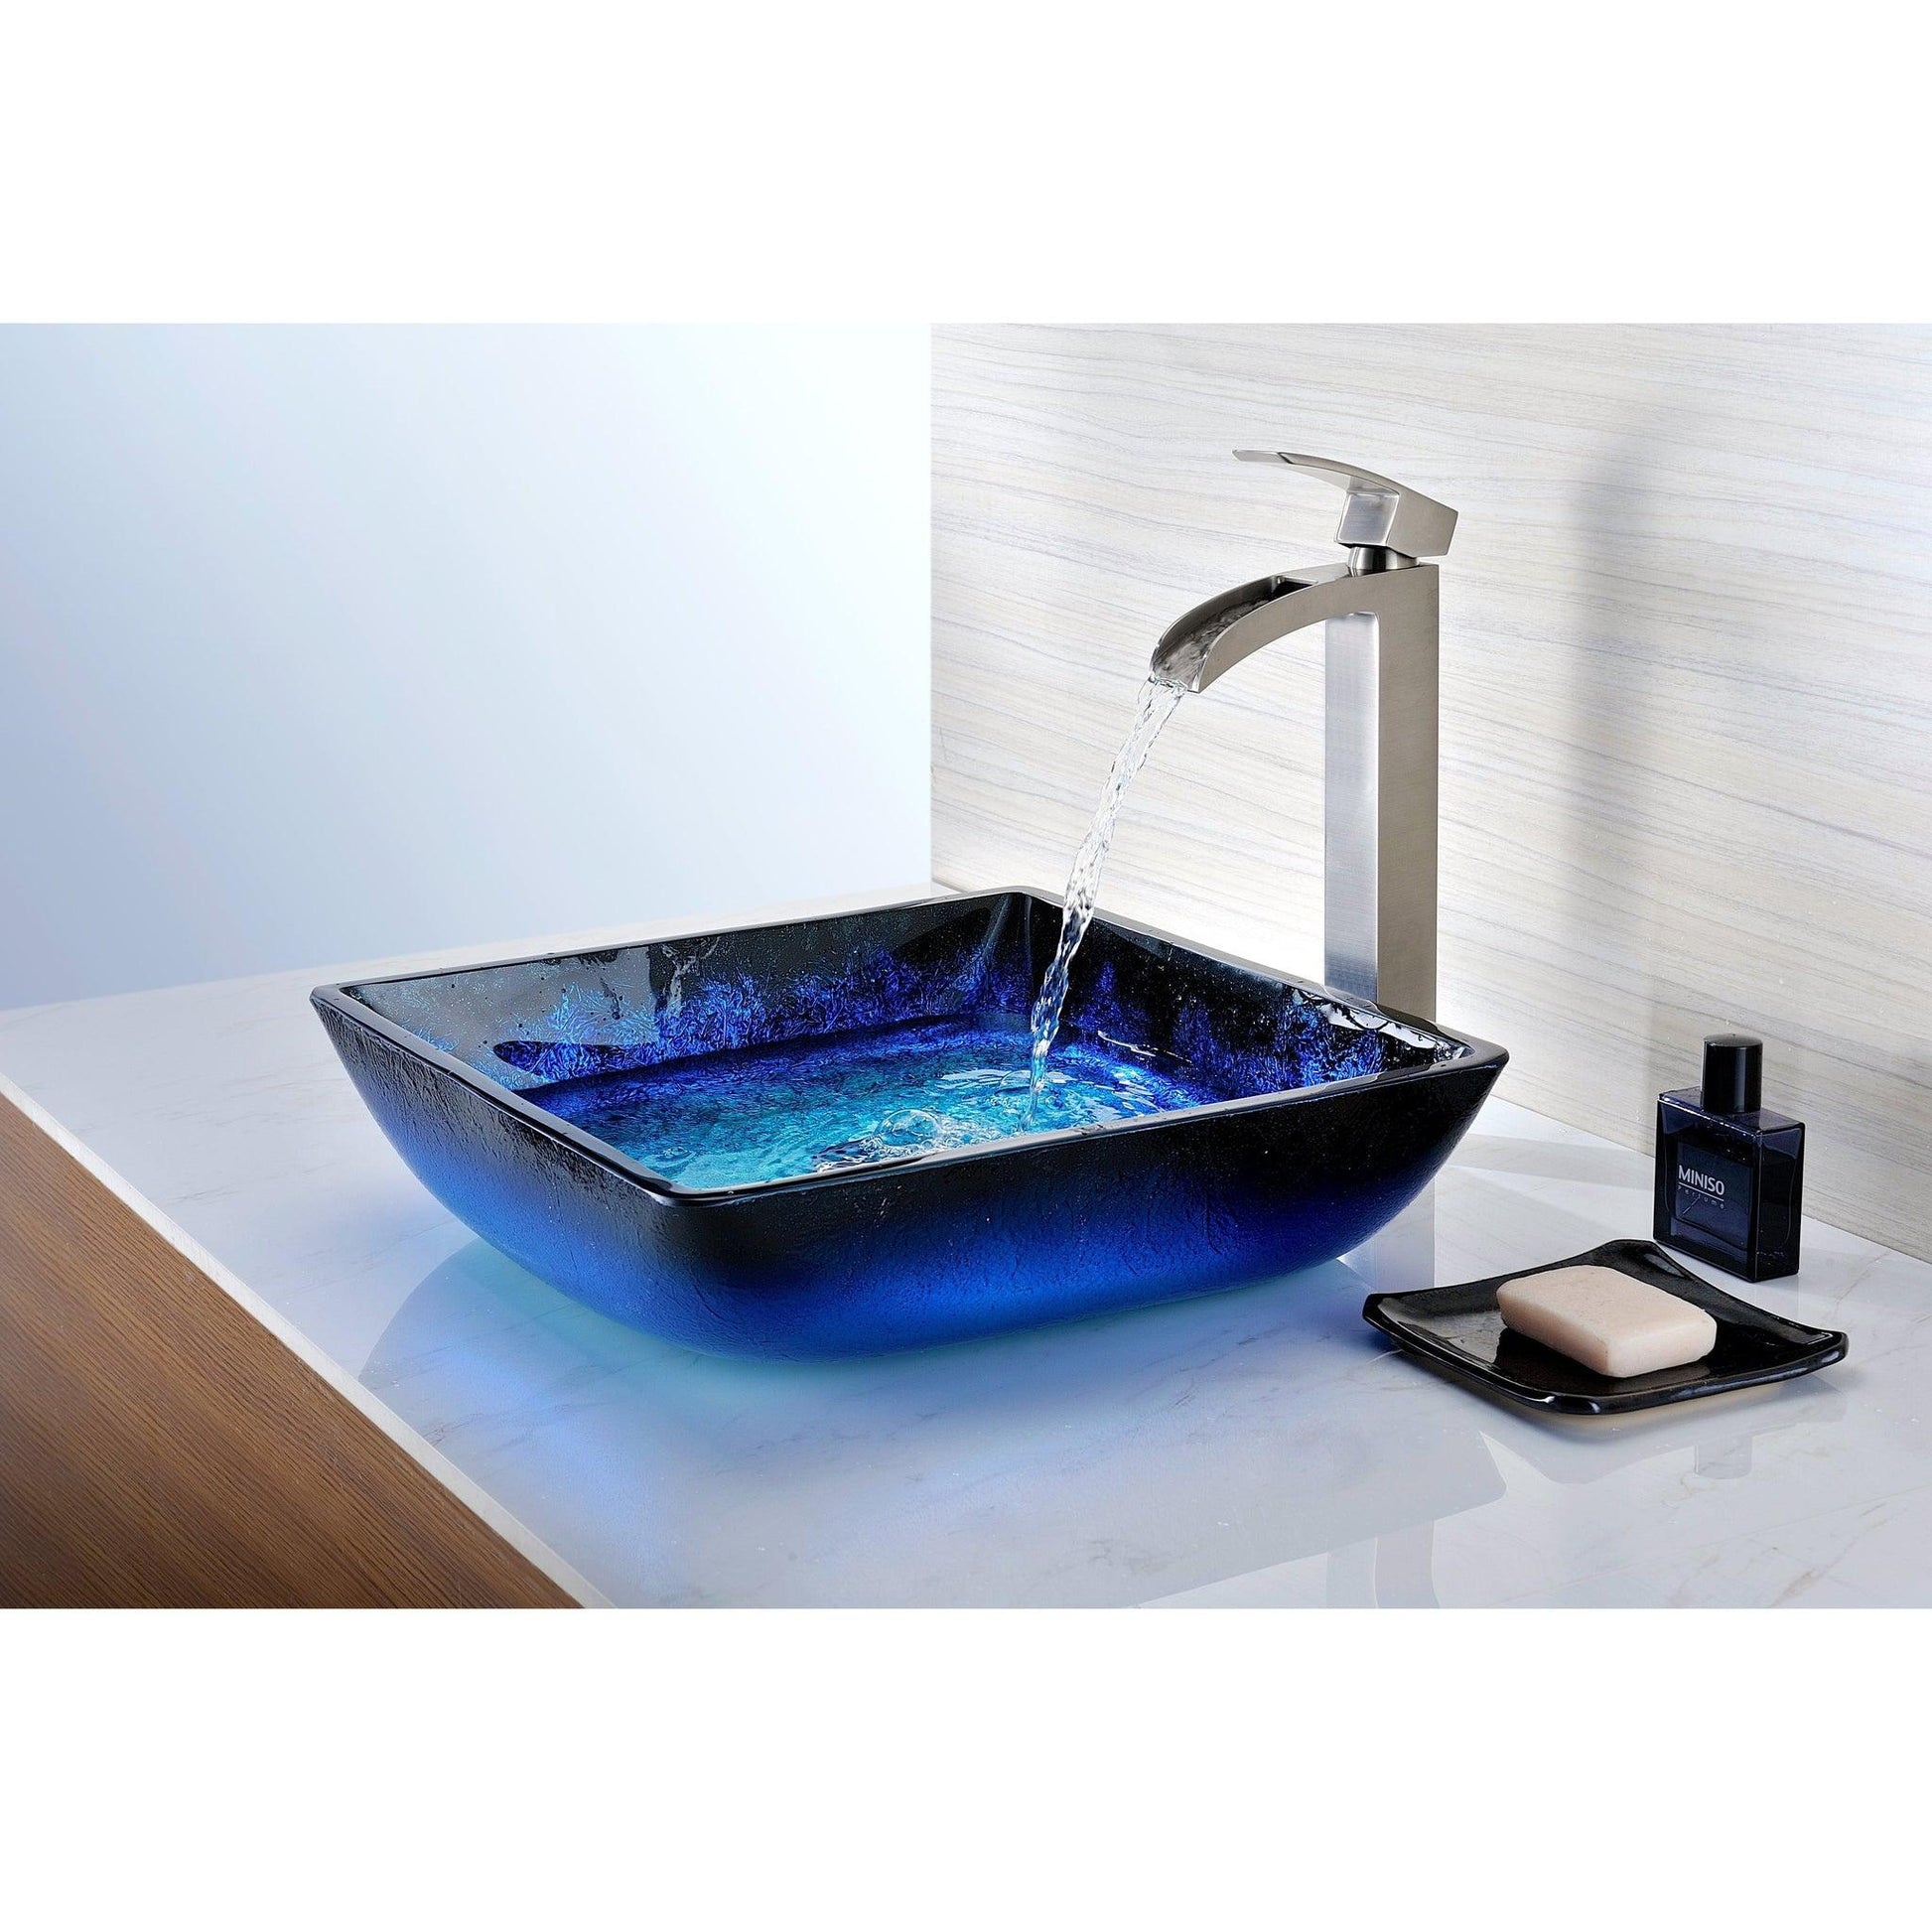 ANZZI Viace Series 15" x 15" Square Shaped Blazing Blue Deco-Glass Vessel Sink With Polished Chrome Pop-Up Drain